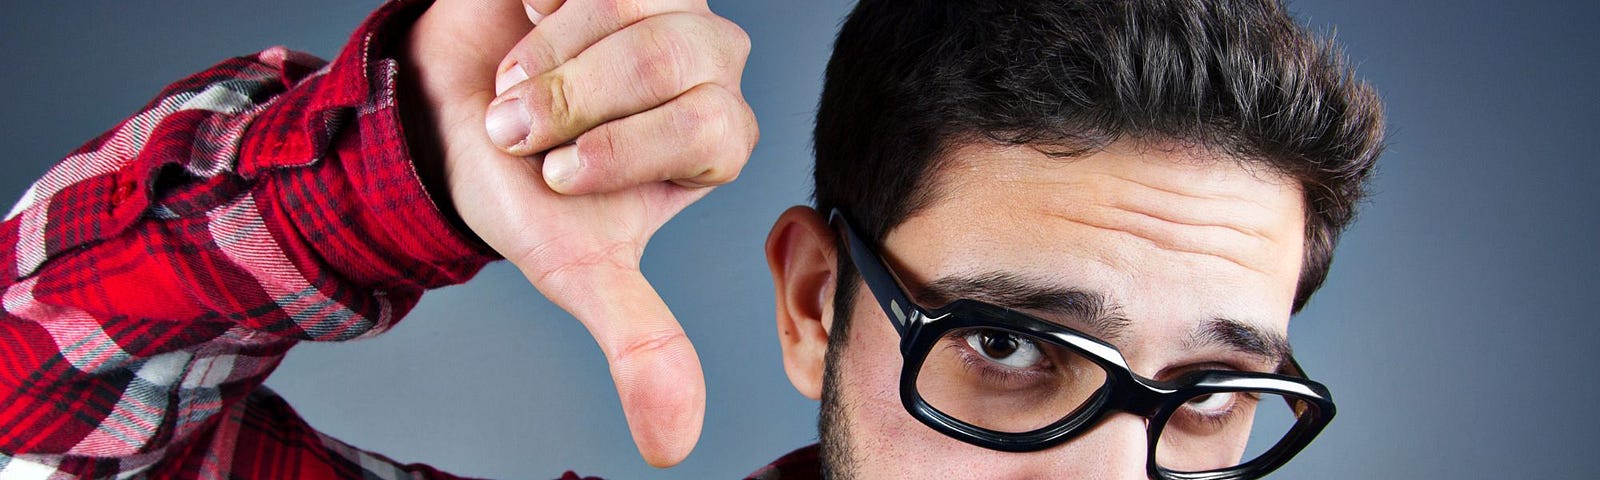 A man wearing glasses showing thumbs down